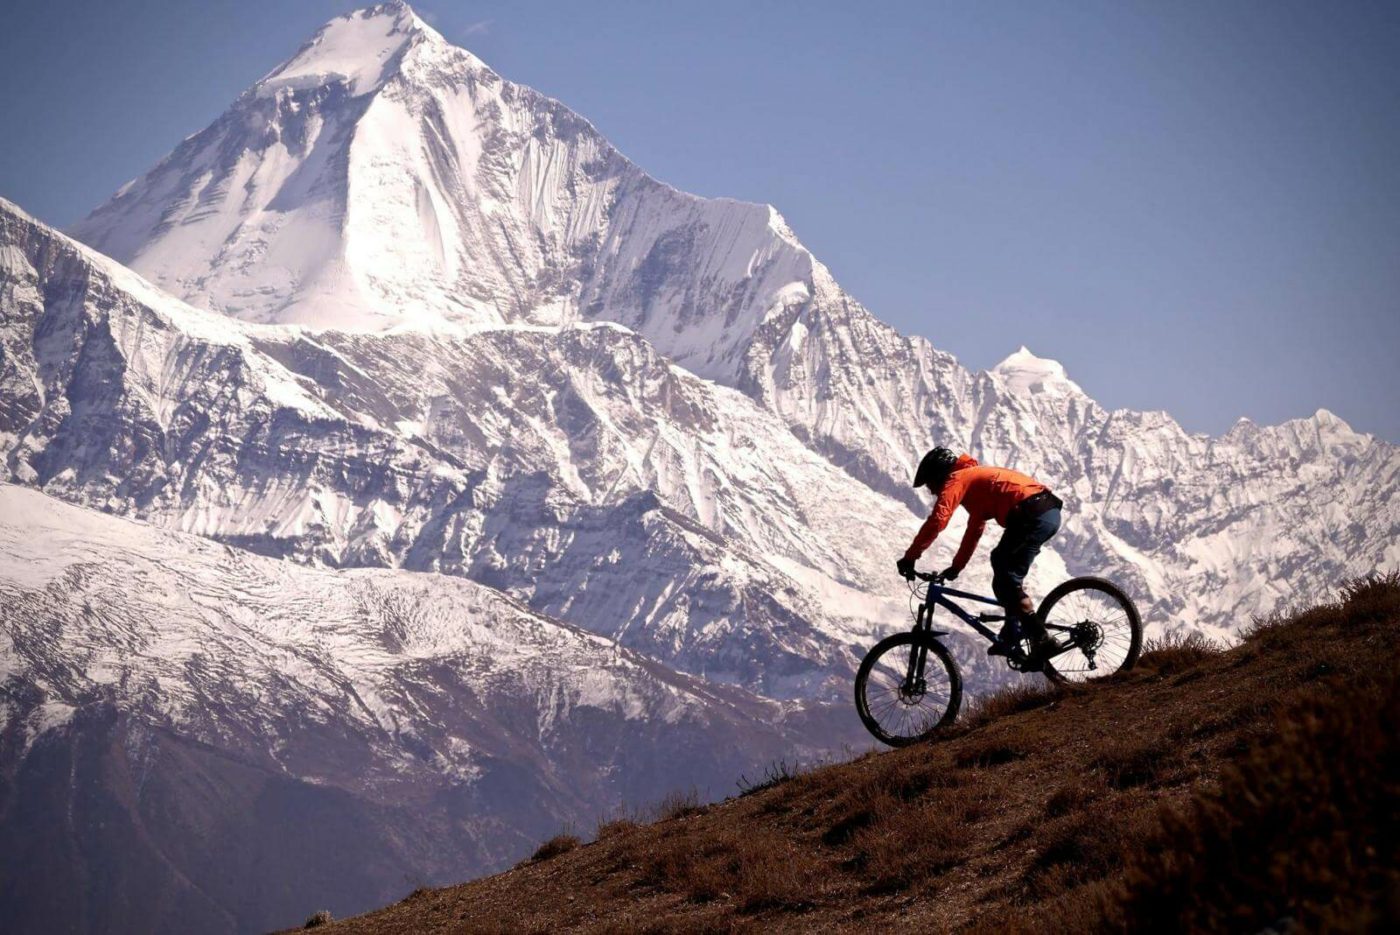 Mountain Biker going down a steep hill with snow-covered mountain in the background